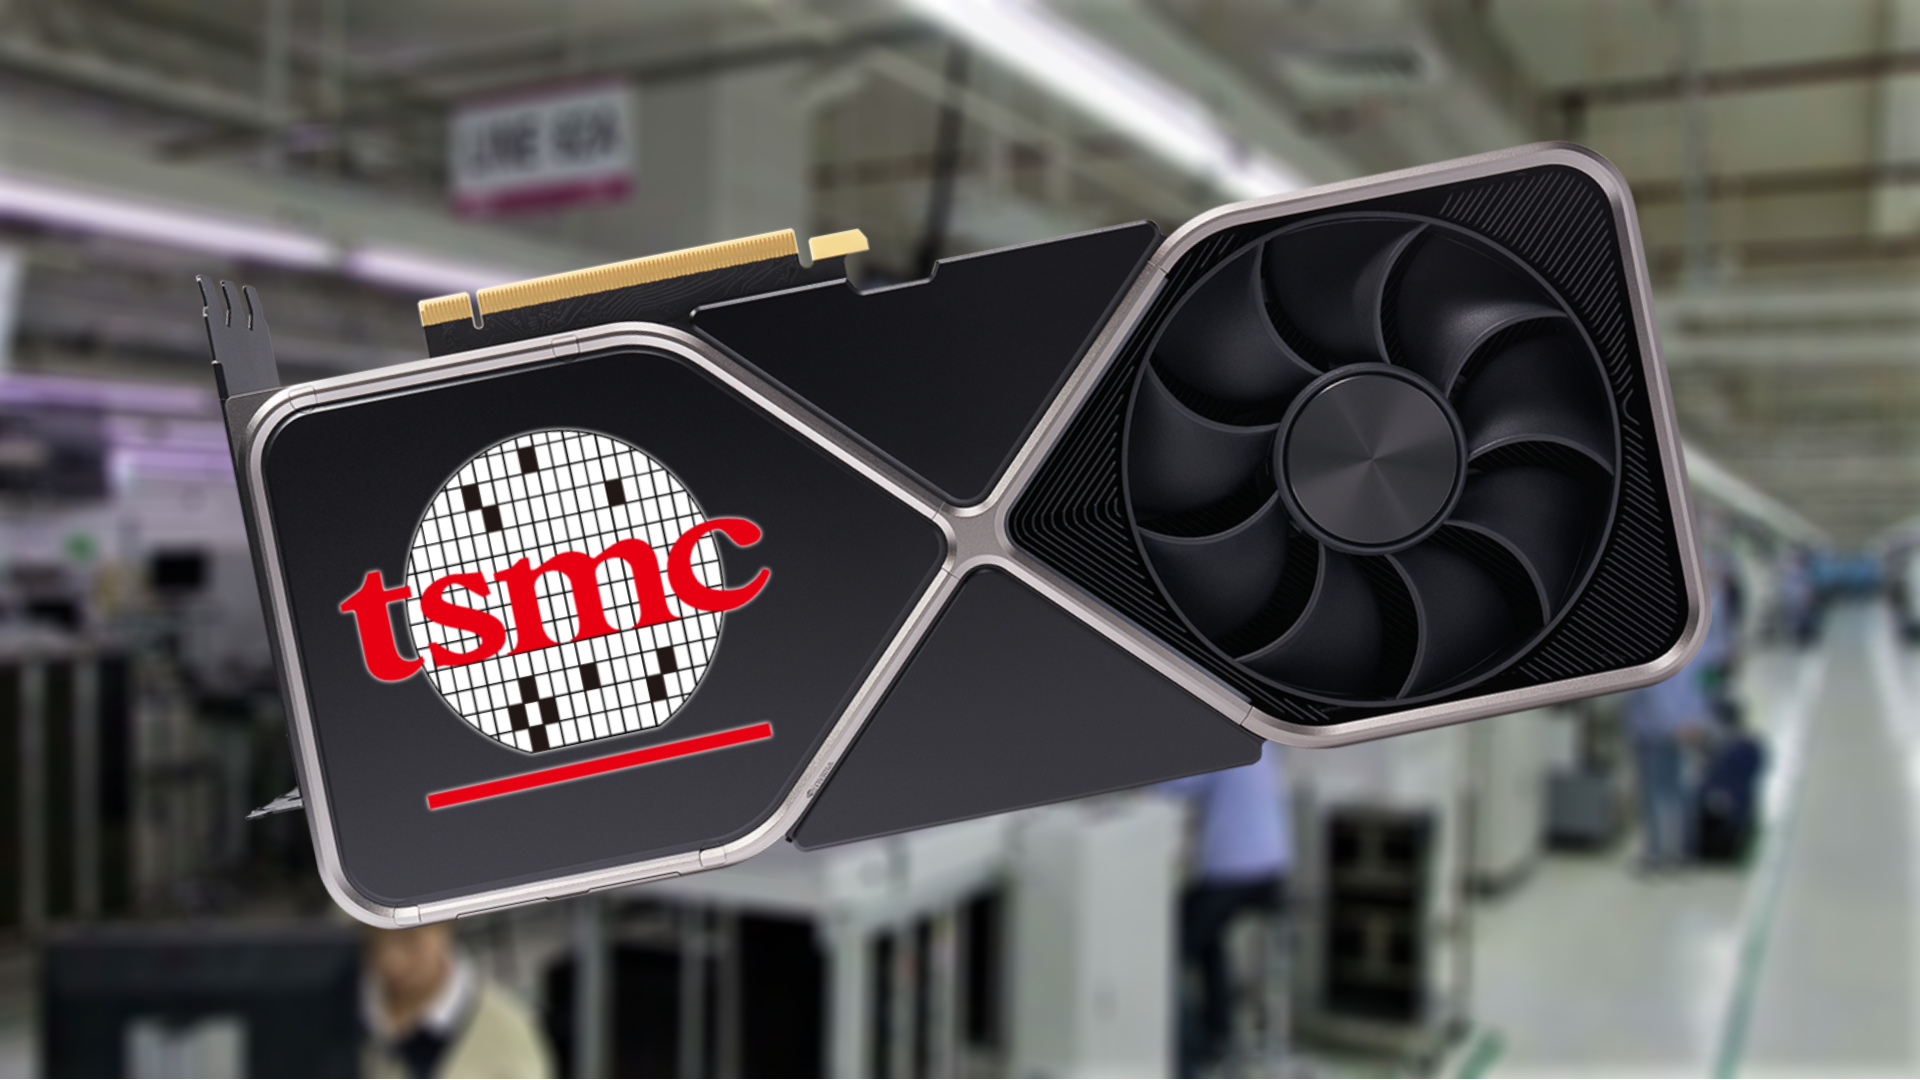 Next Nvidia GPU lineup will be solely fabbed by TSMC